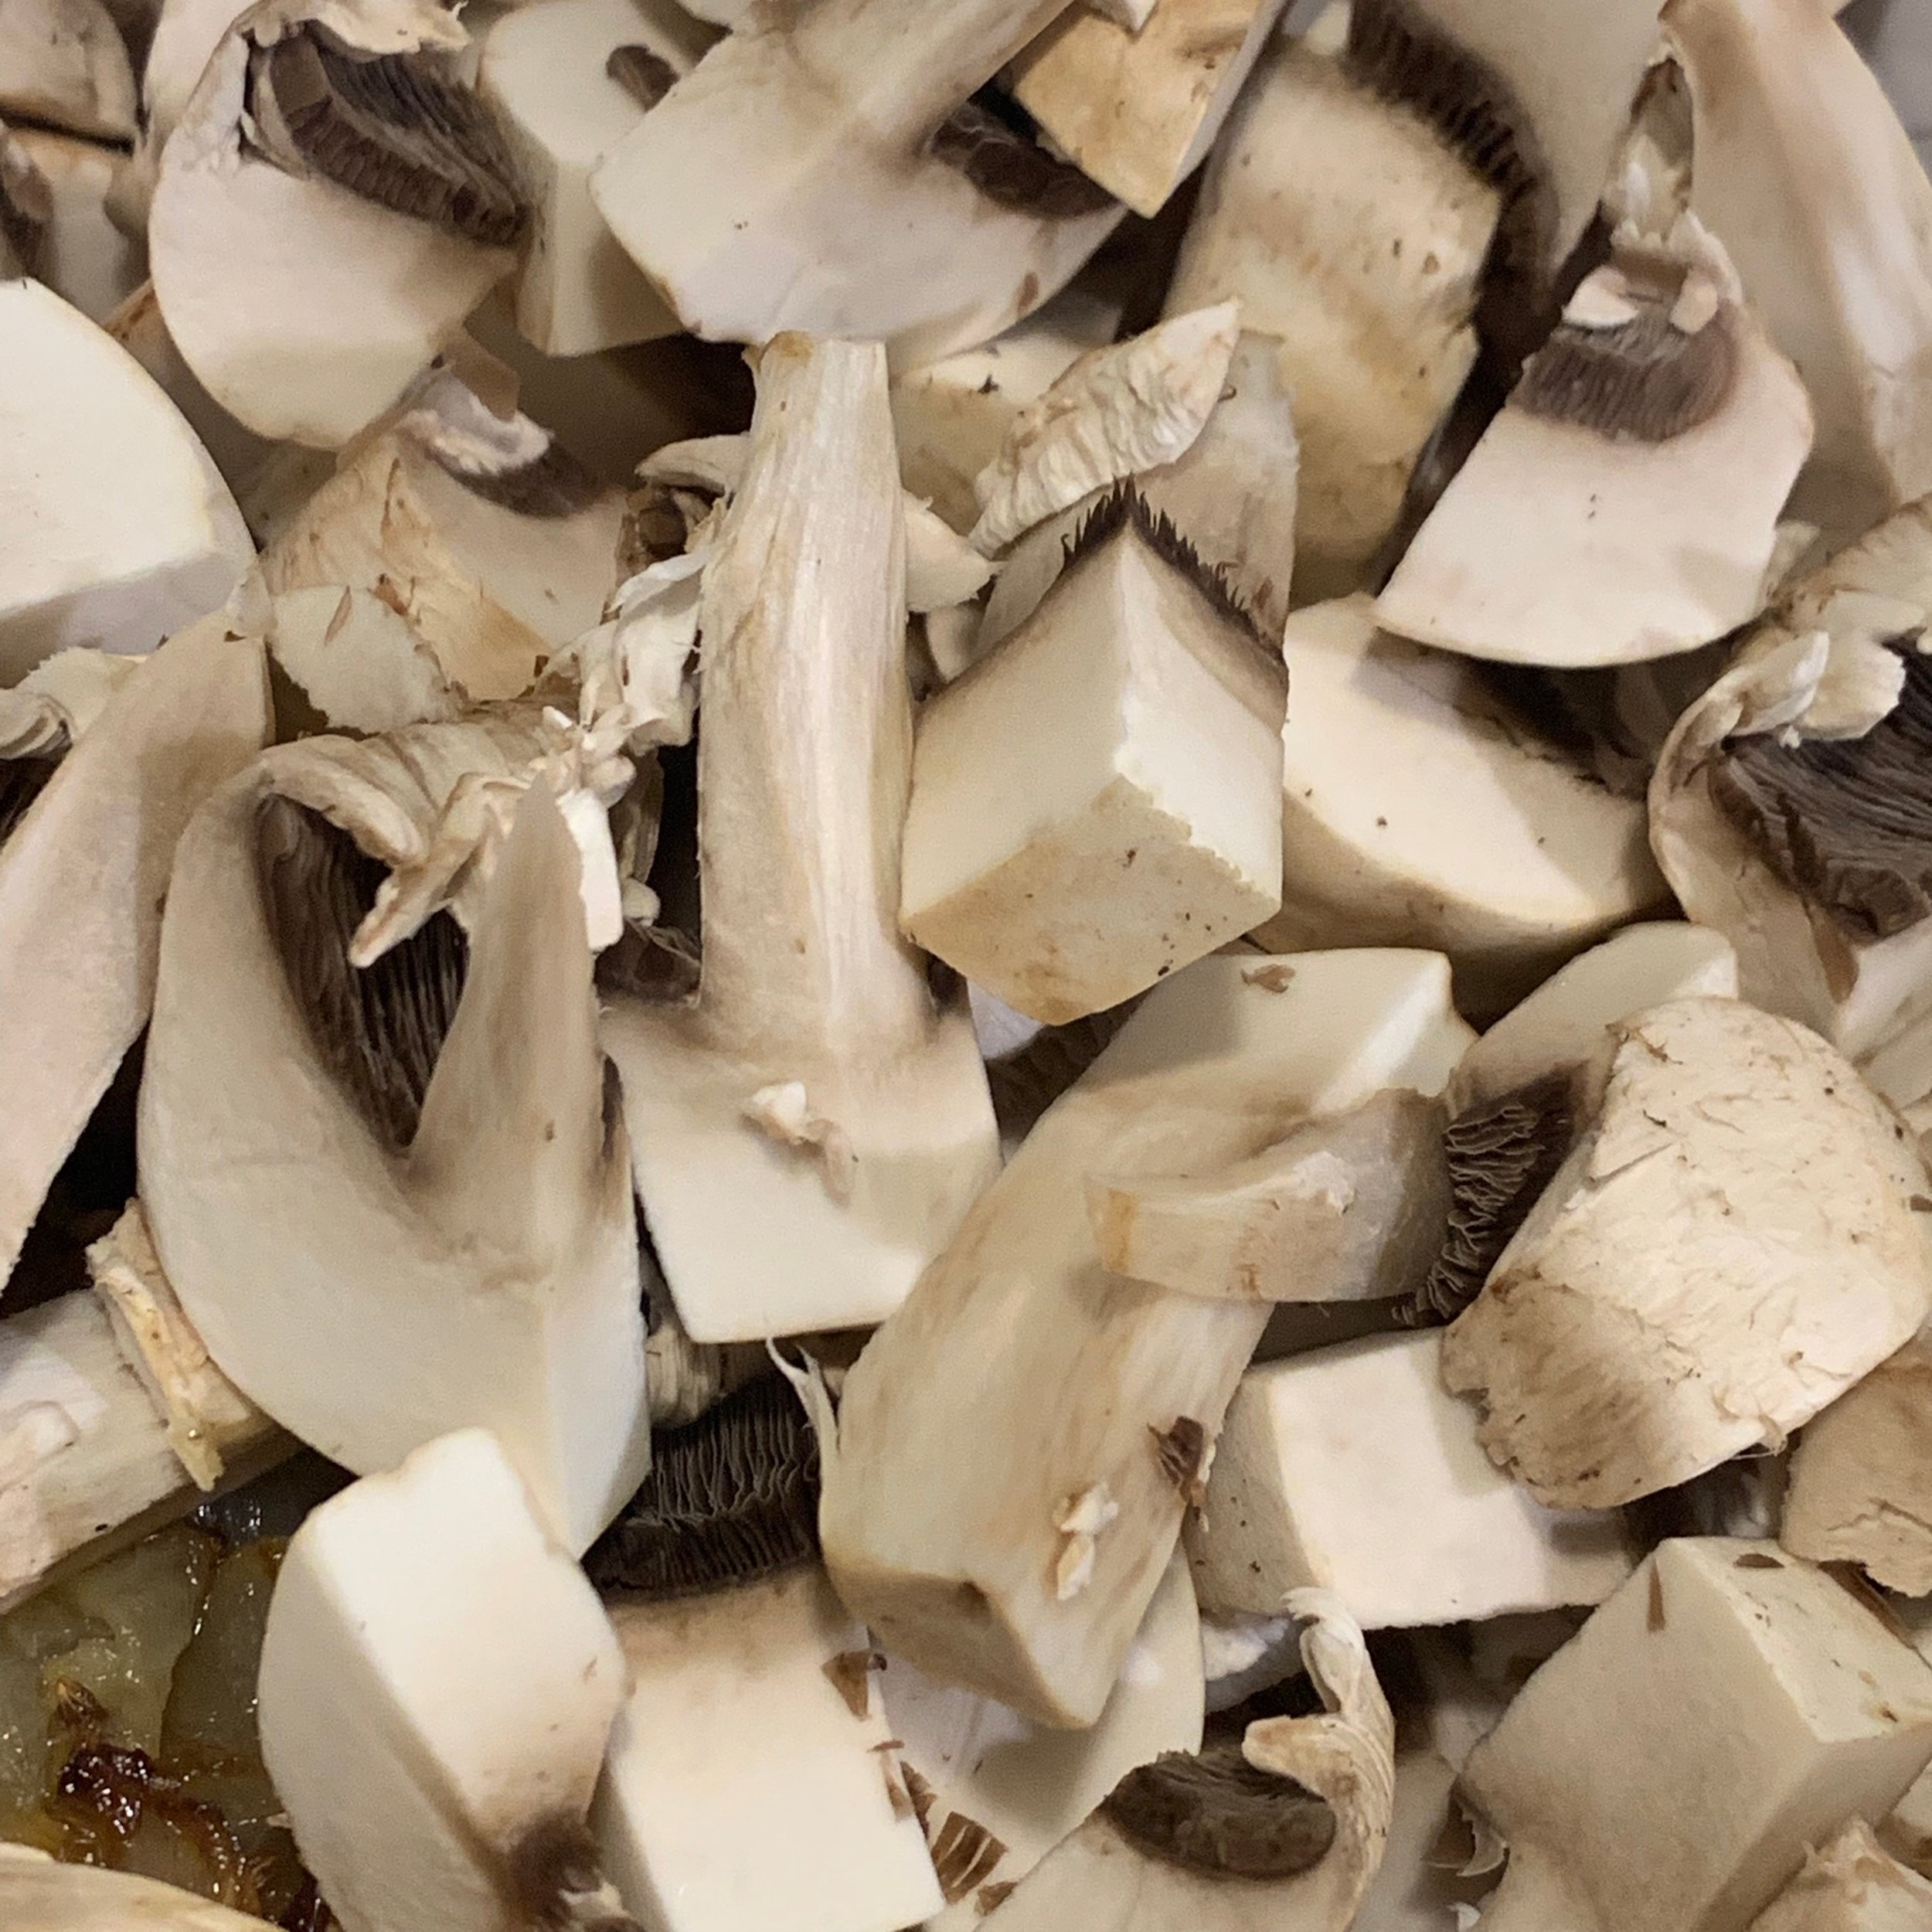 chop your mushrooms coarsely